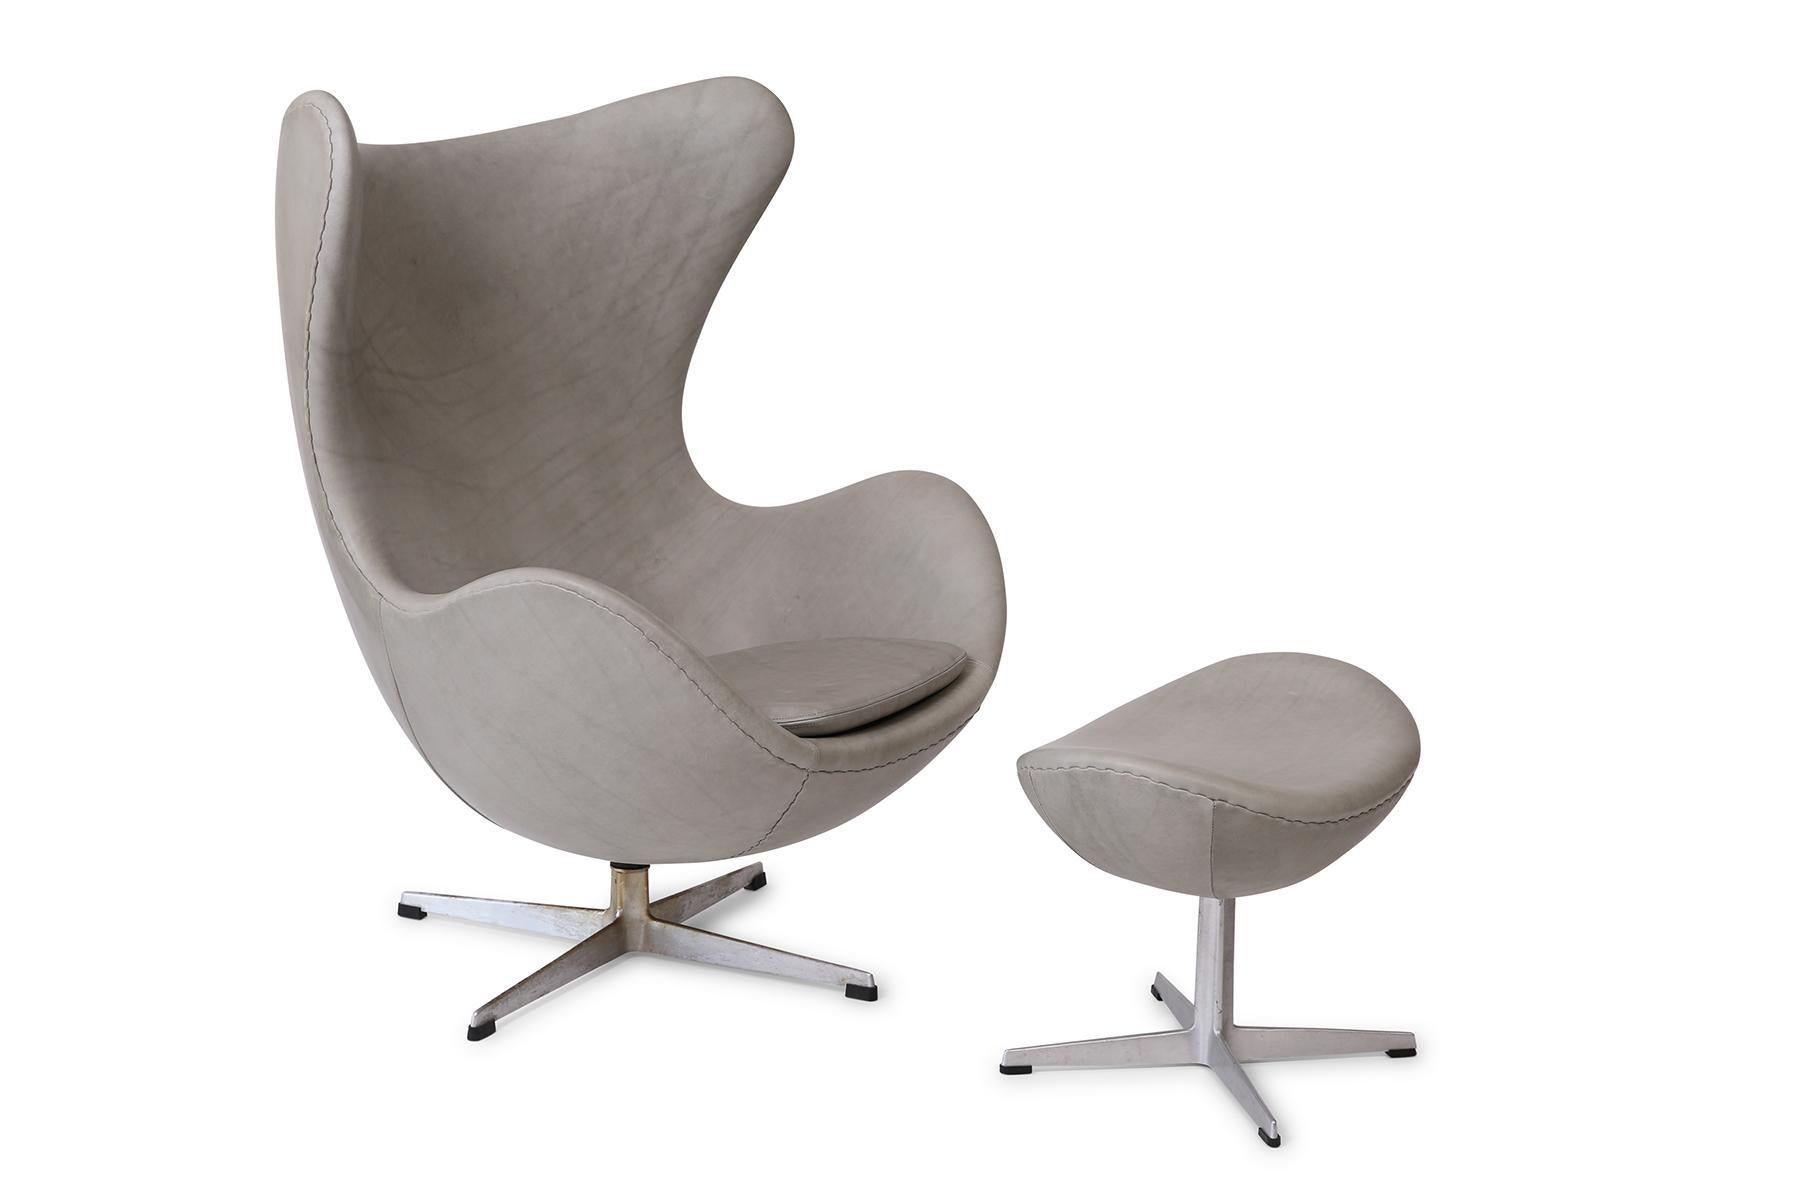 Arne Jacobsen for Fritz Hansen egg chair and ottoman, circa late 1960s. This stunning example has been newly upholstered in a supple and beautifully patinated light gray leather. Price listed is for the chair and ottoman.